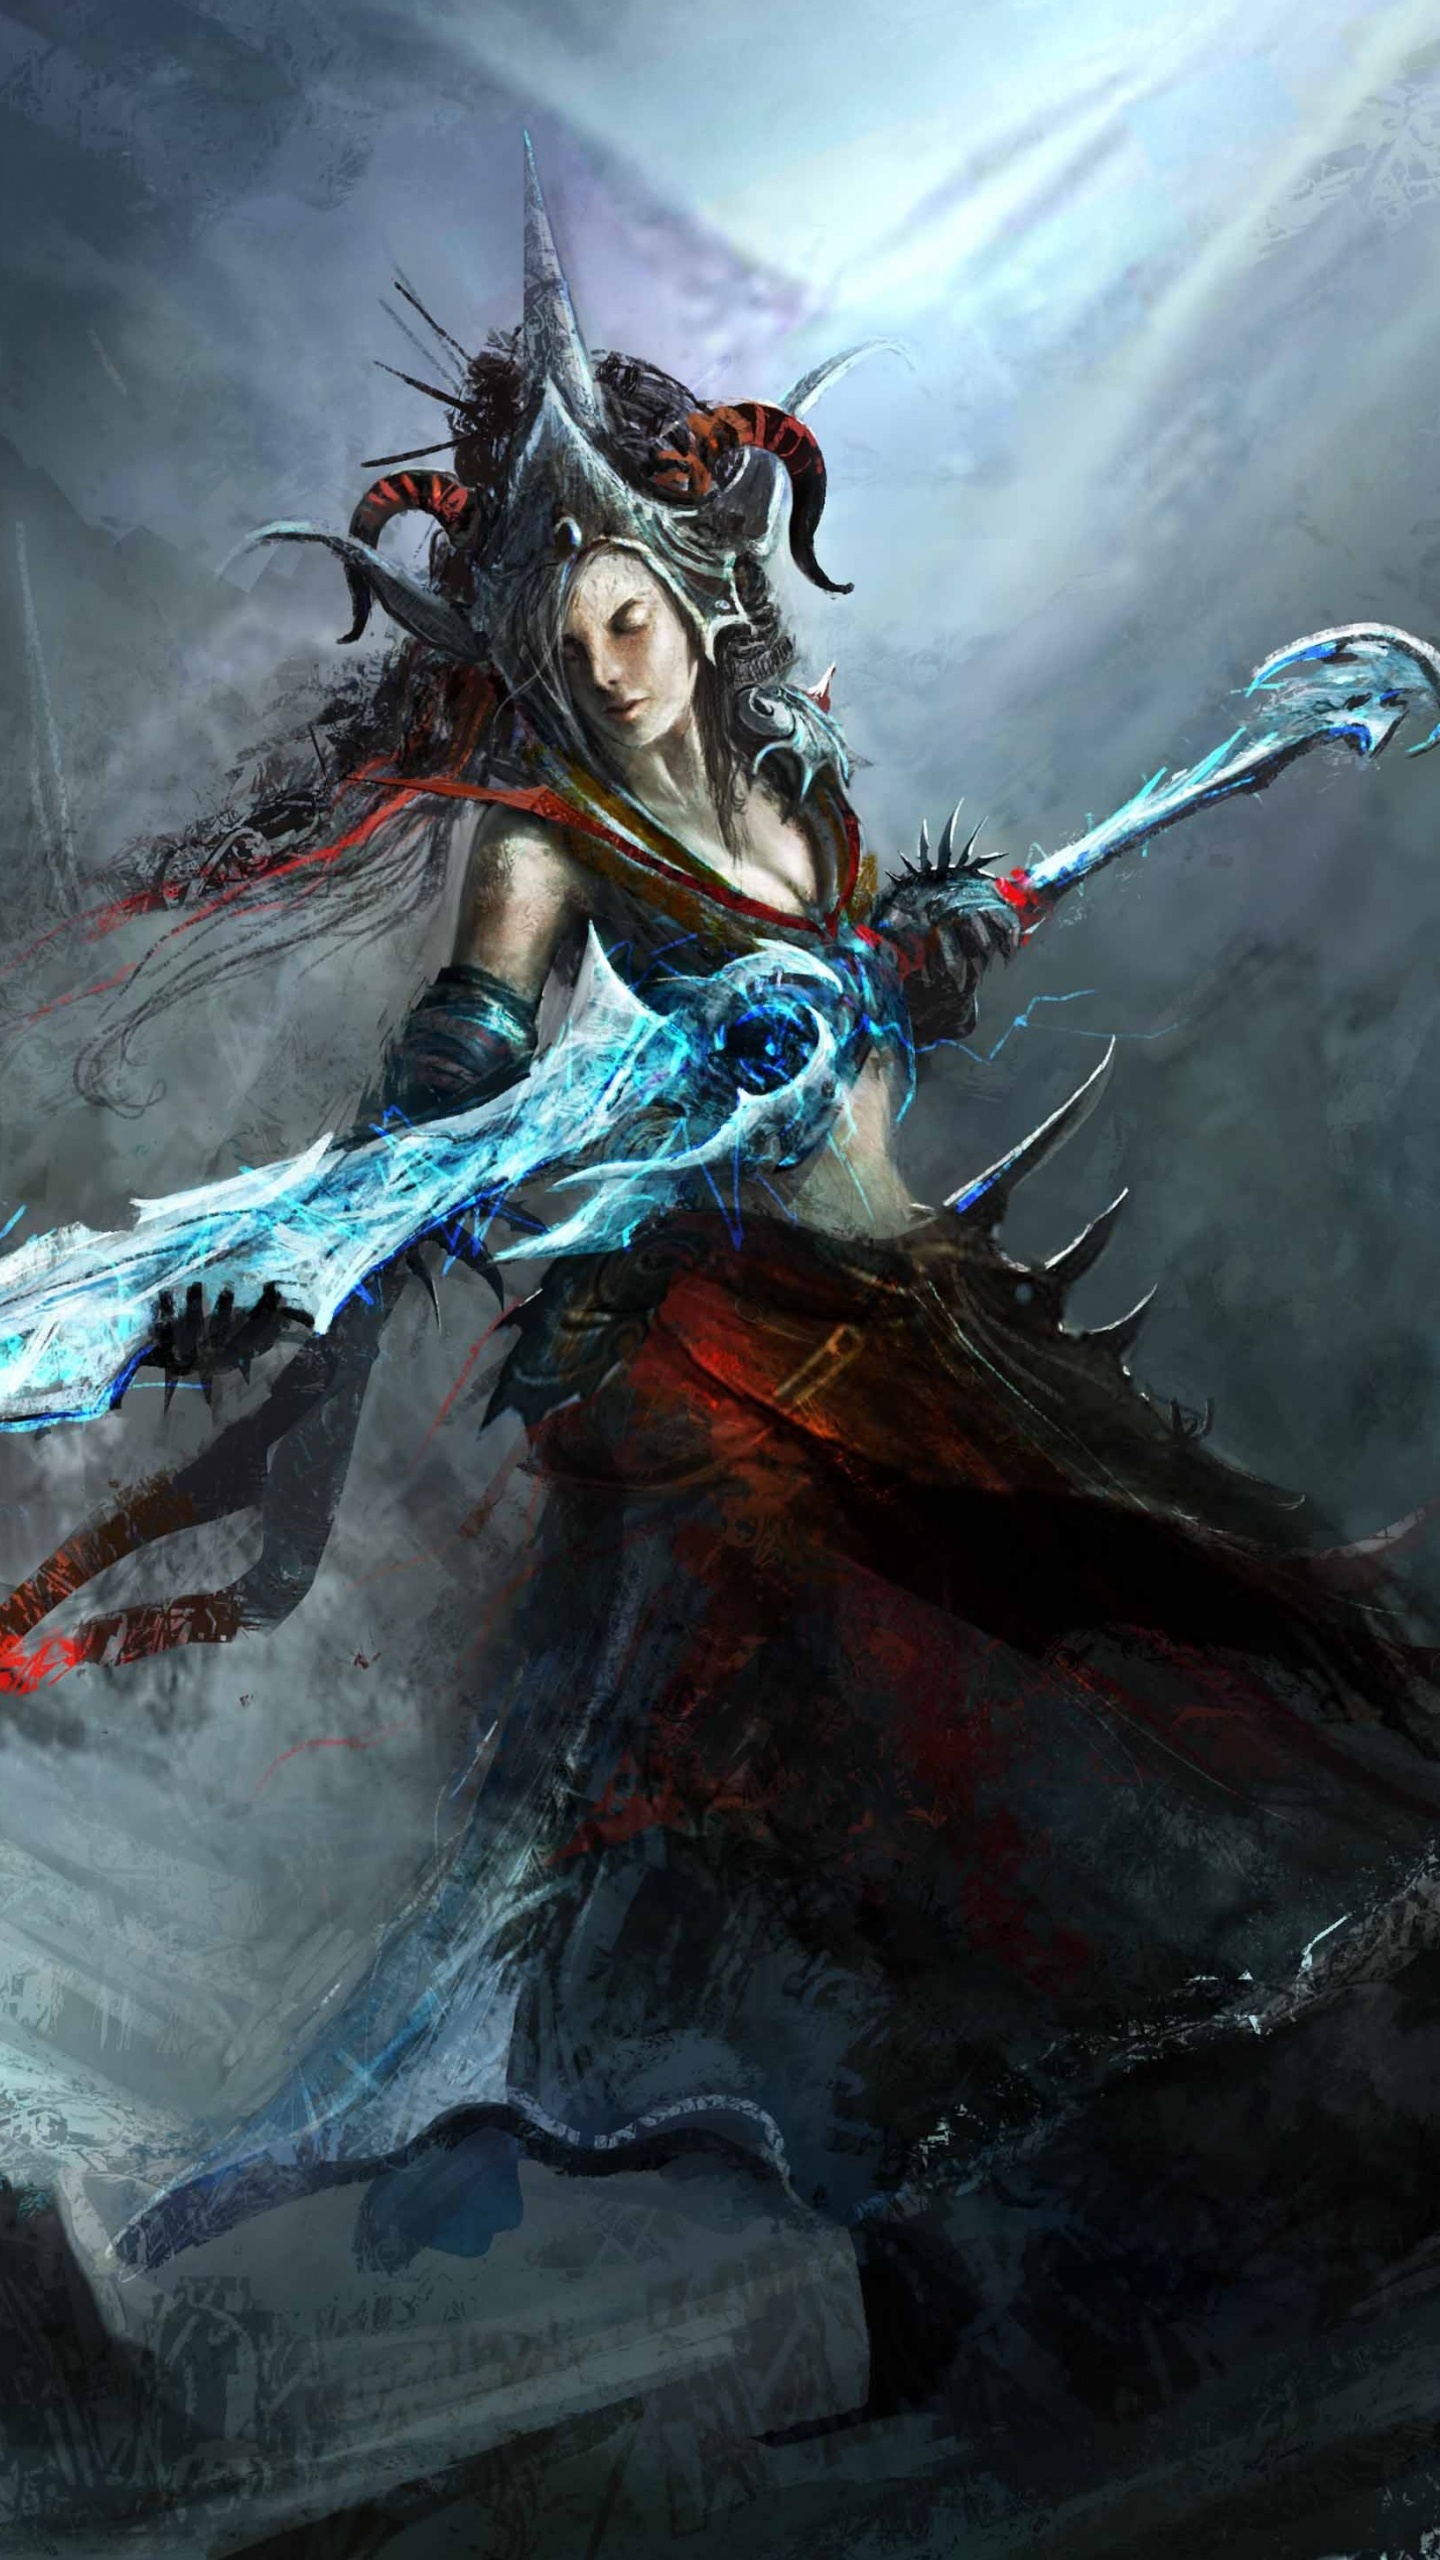 Woman in Blue Dress Holding a Sword Illustration. Wallpaper in 1440x2560 Resolution